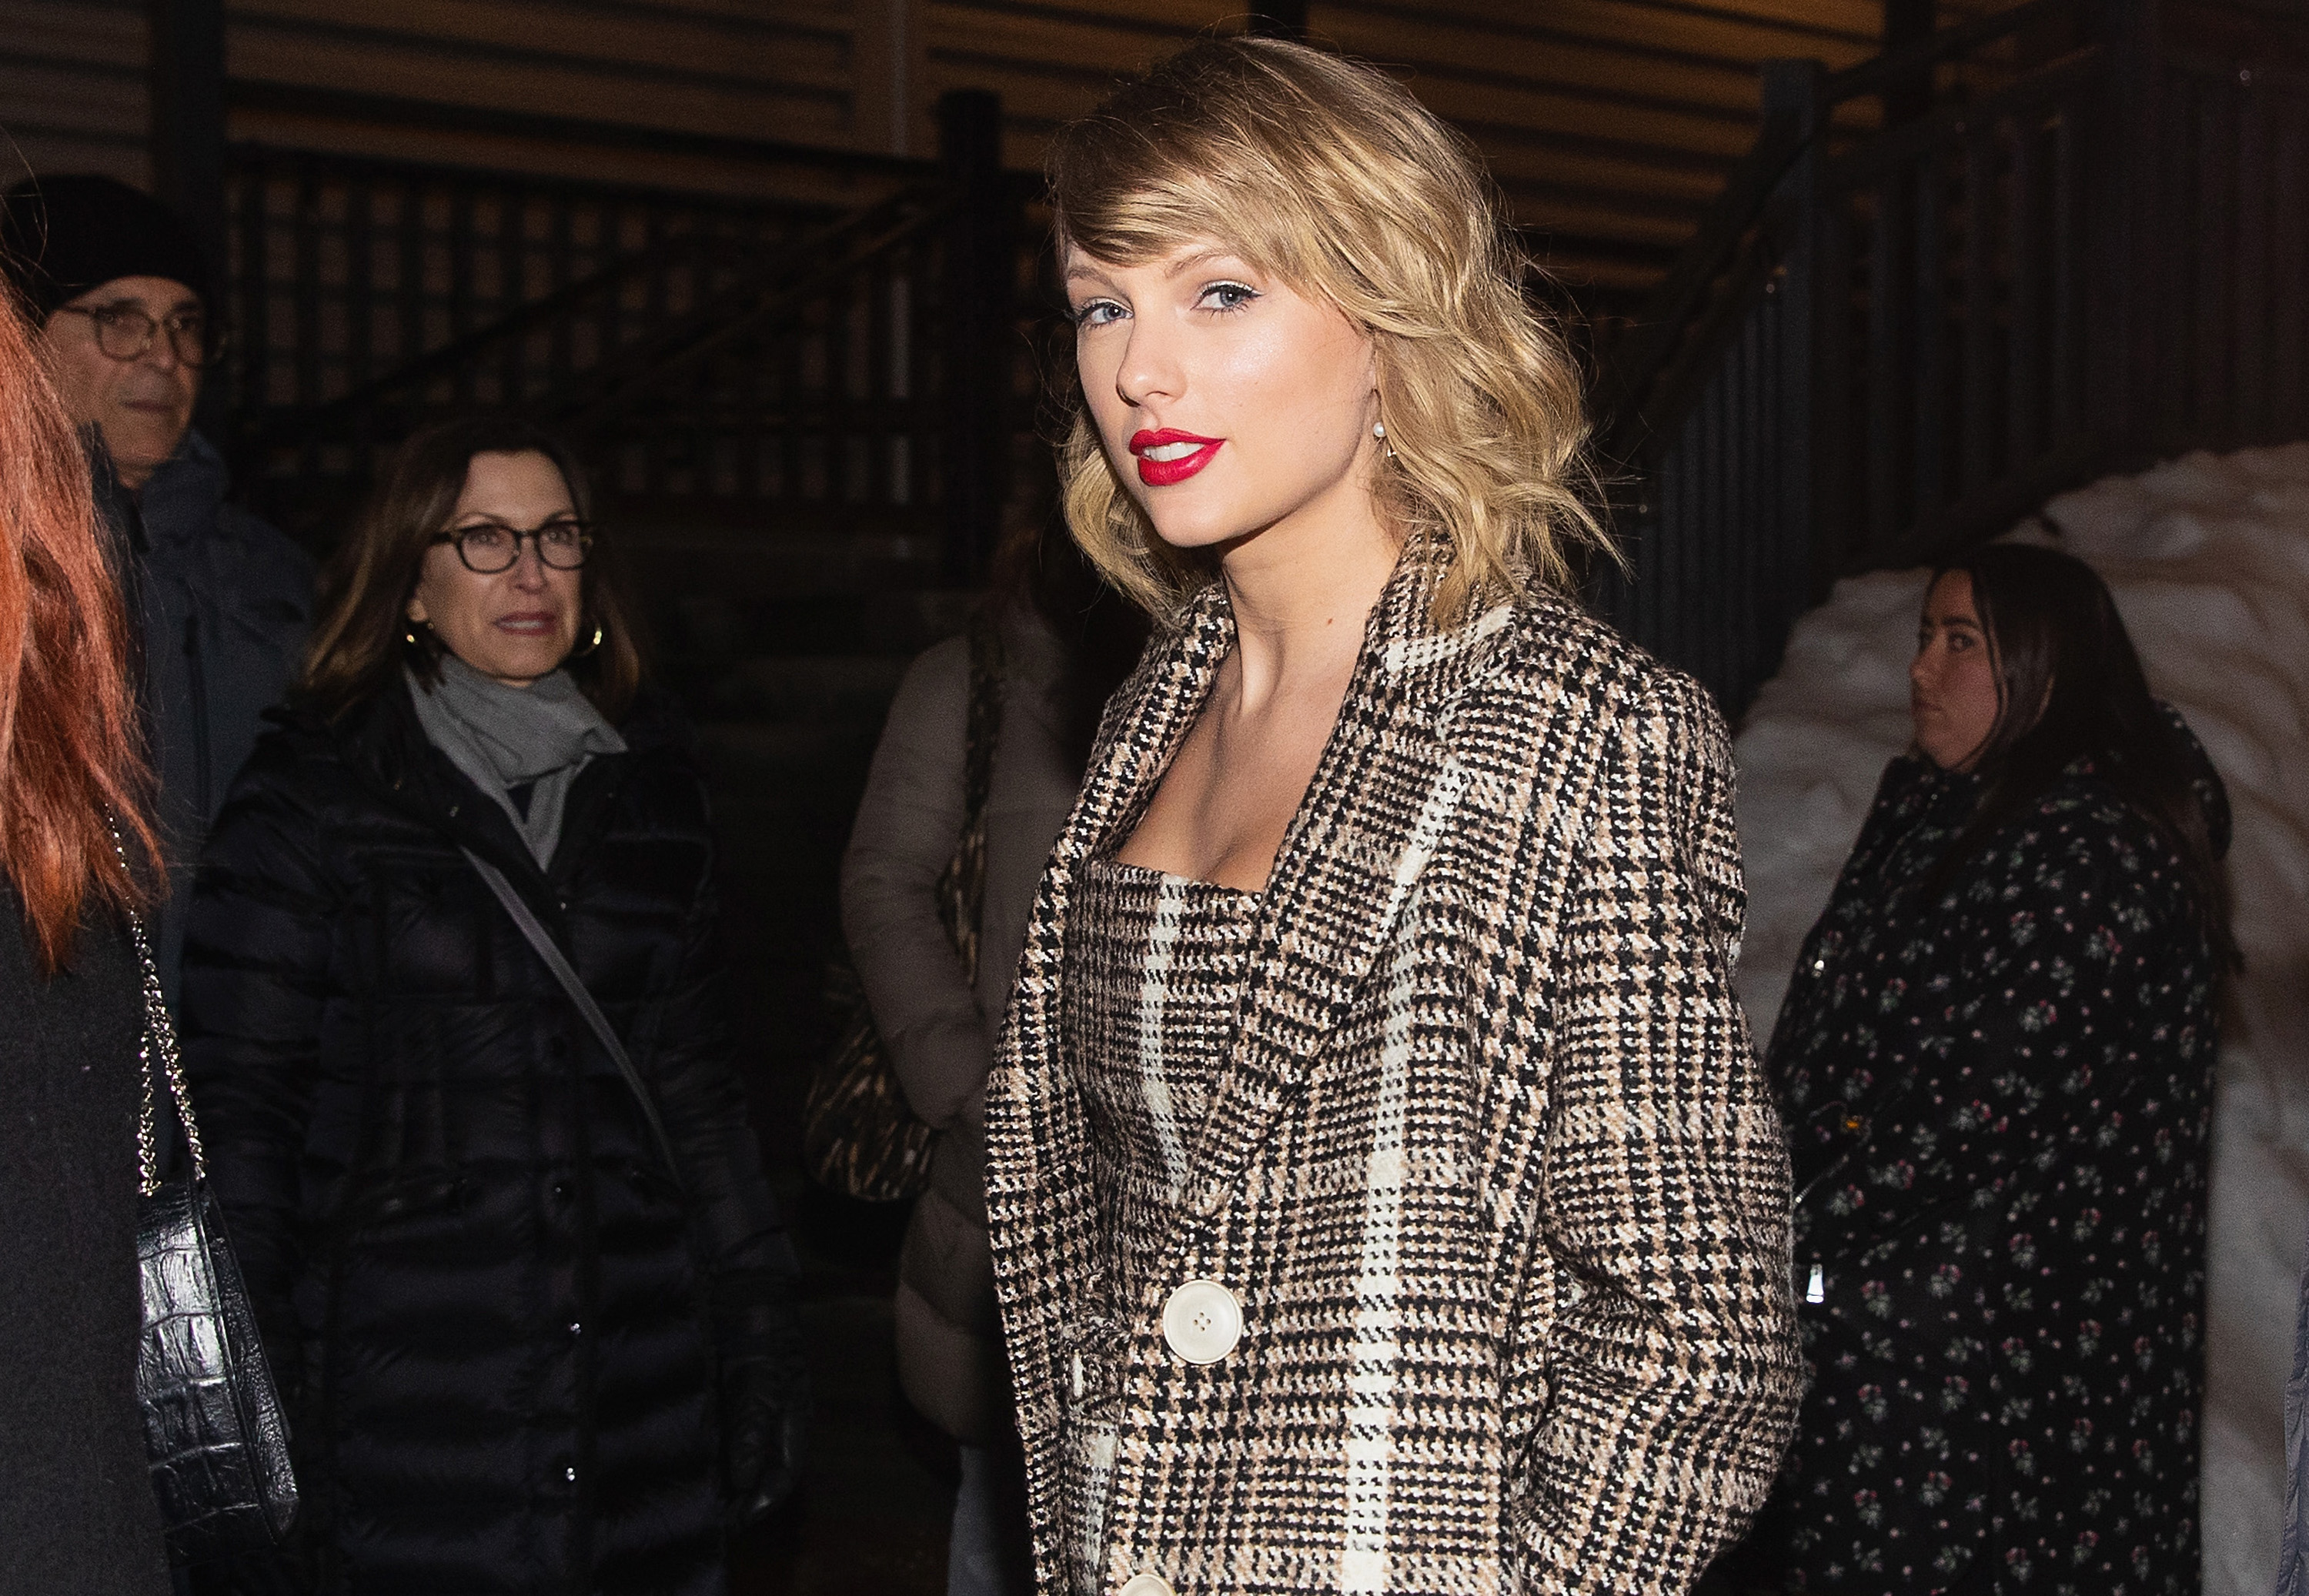 Taylor Swift wearing a coat during the 'Lover' era